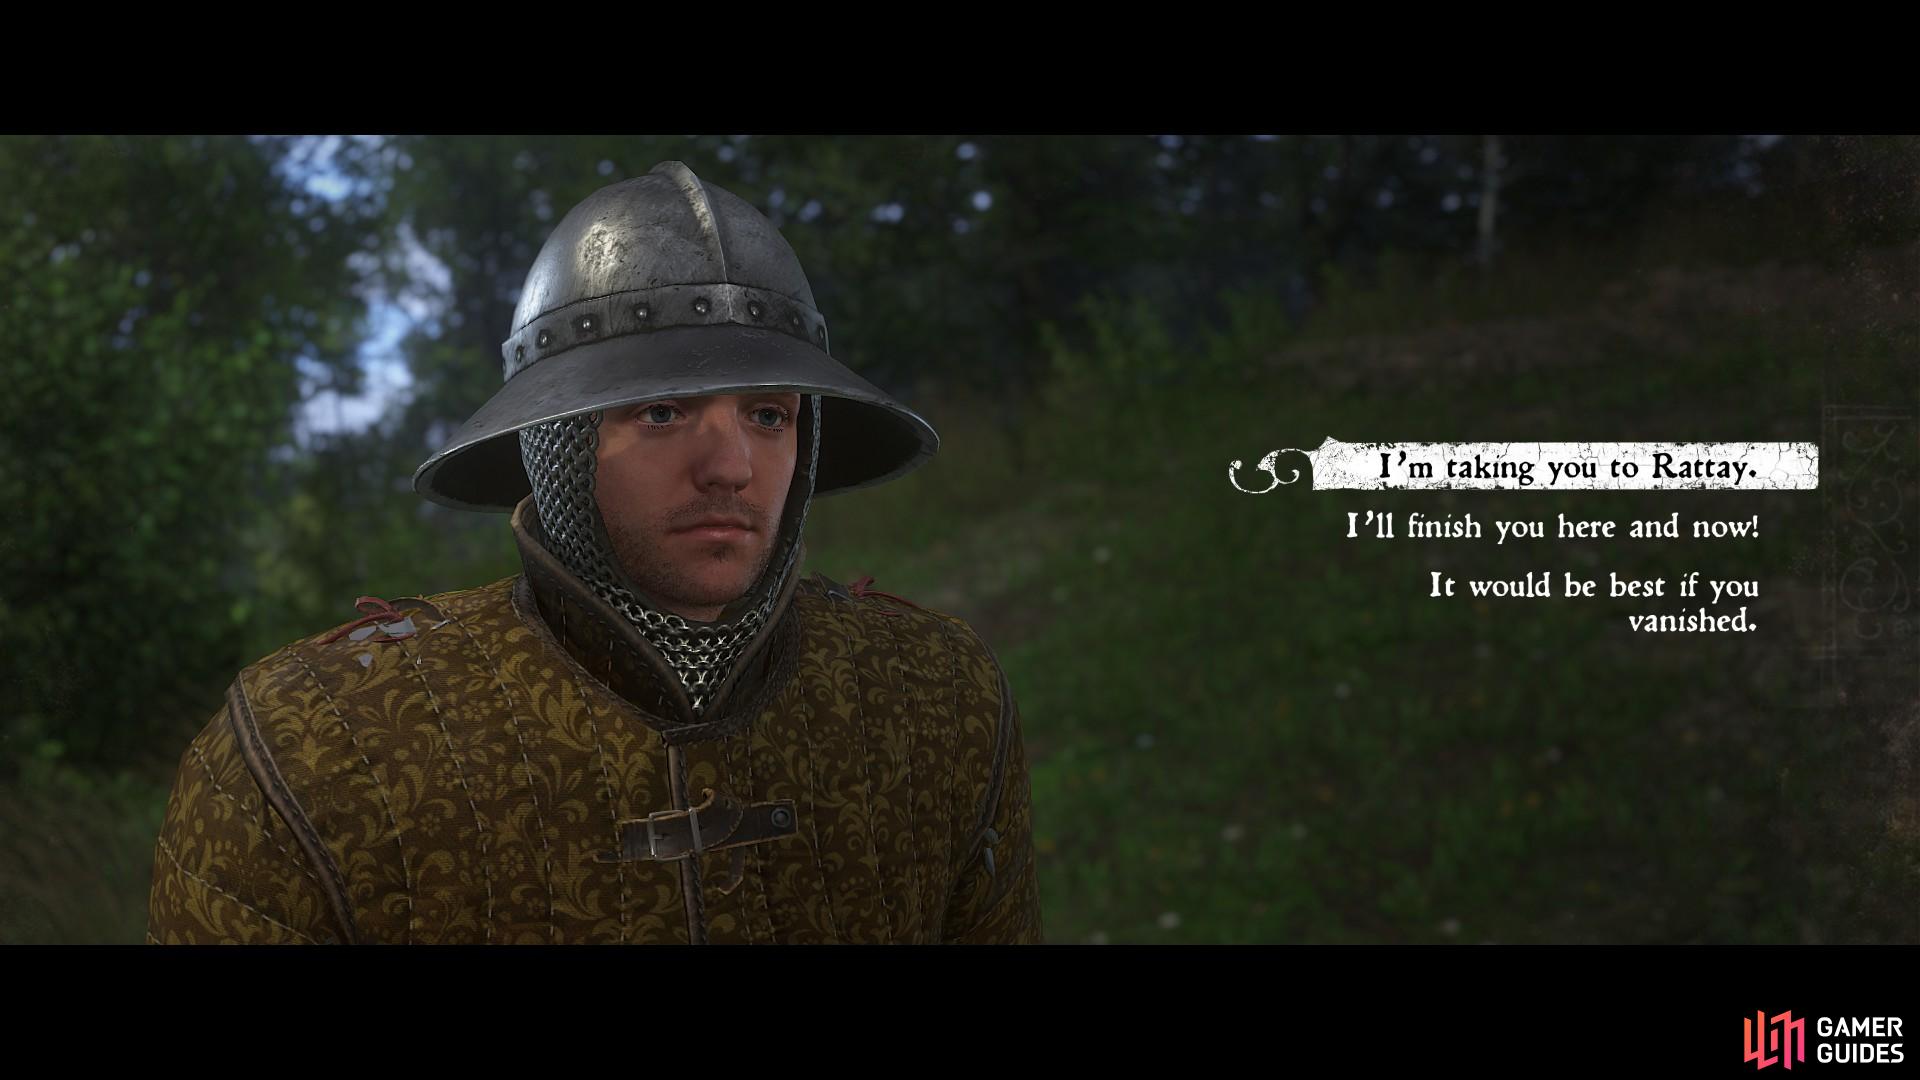 With the bandits dealt with, it is time for you to decide Hynek’s fate; bring him to justice in Rattay, kill him yourself or release him unconditionally as recompense for his cooperation.